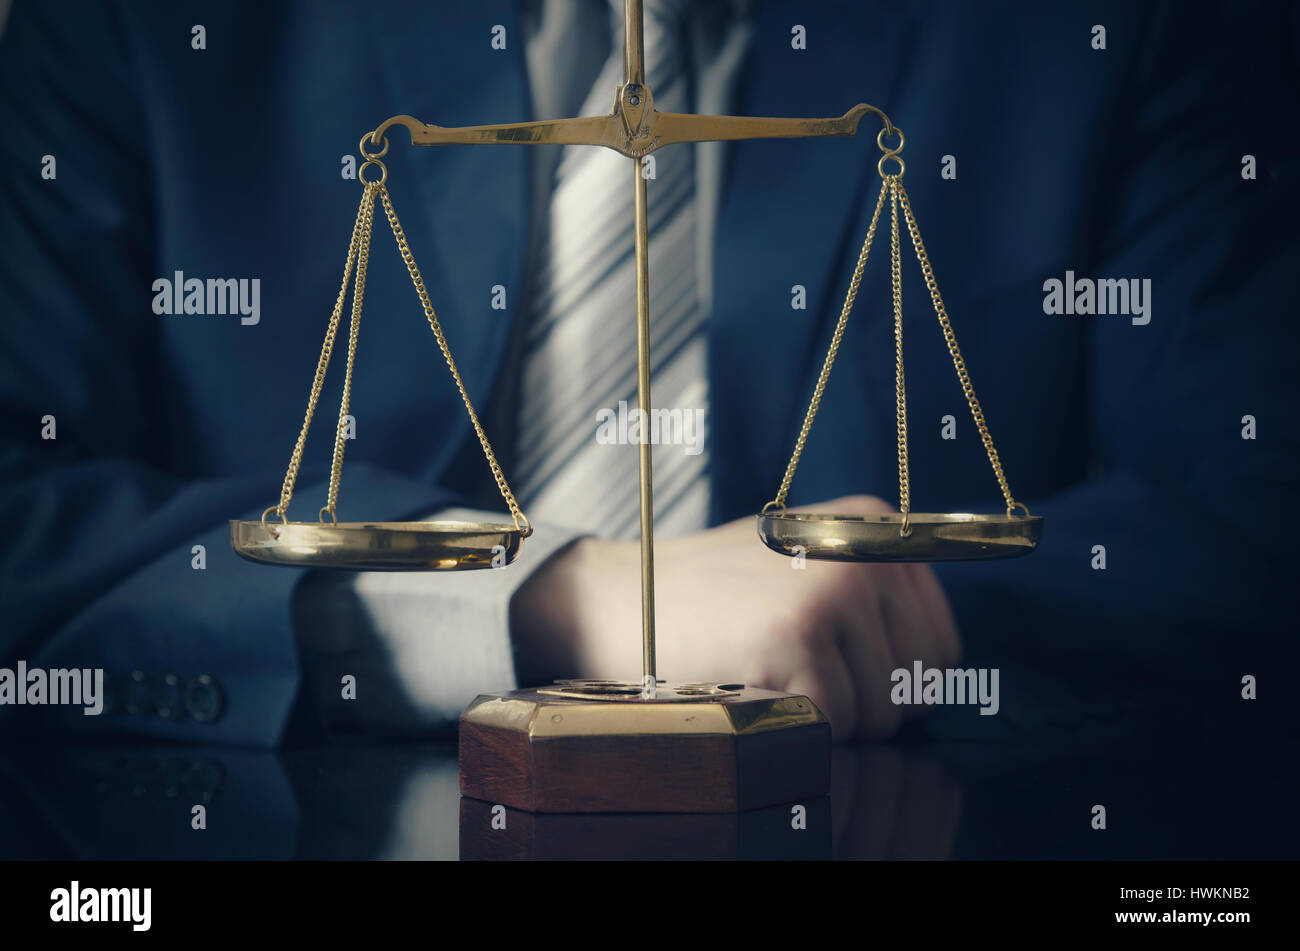 Scales Of Justice, Weight Balance #Ad , #Sponsored, #Justice#Scales#Balance# Weight